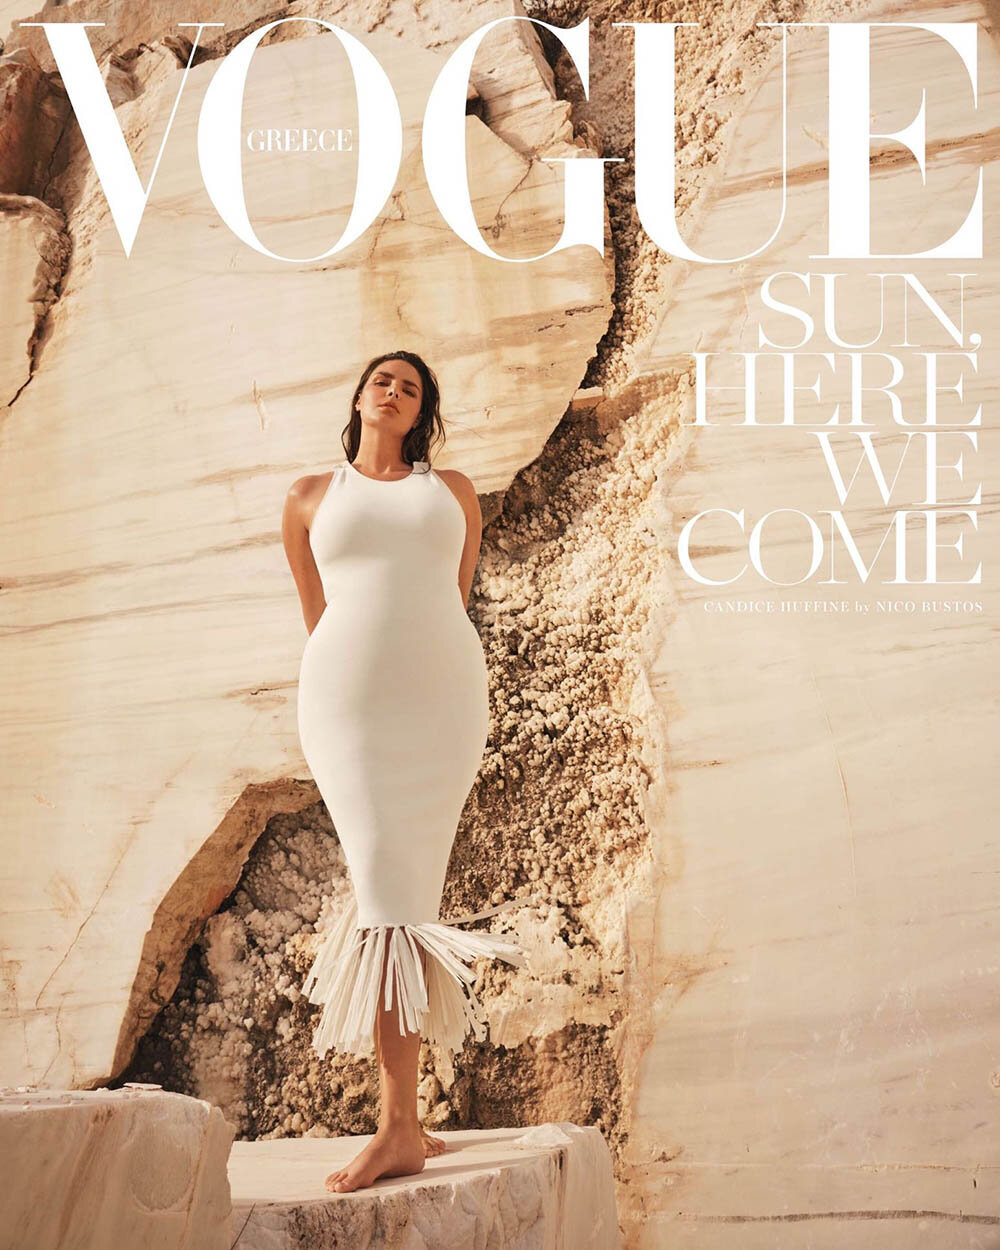 Candice Huffine Covers Vogue Greece June 2020 Nico Bustos (2).jpg